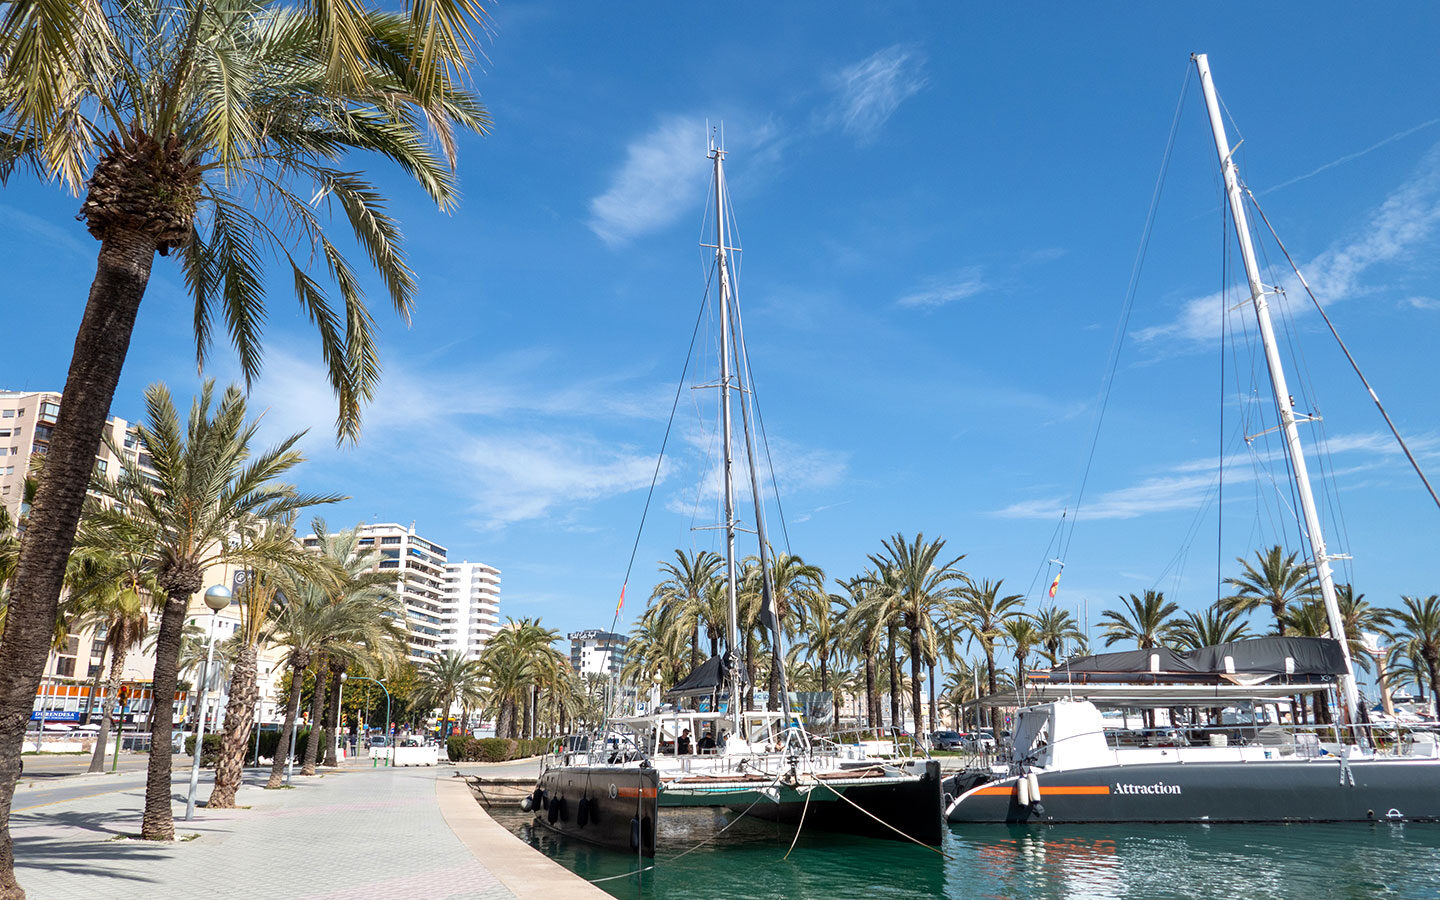 The Paseo Marítimo waterfront walkway: Things to do in Palma, Mallorca